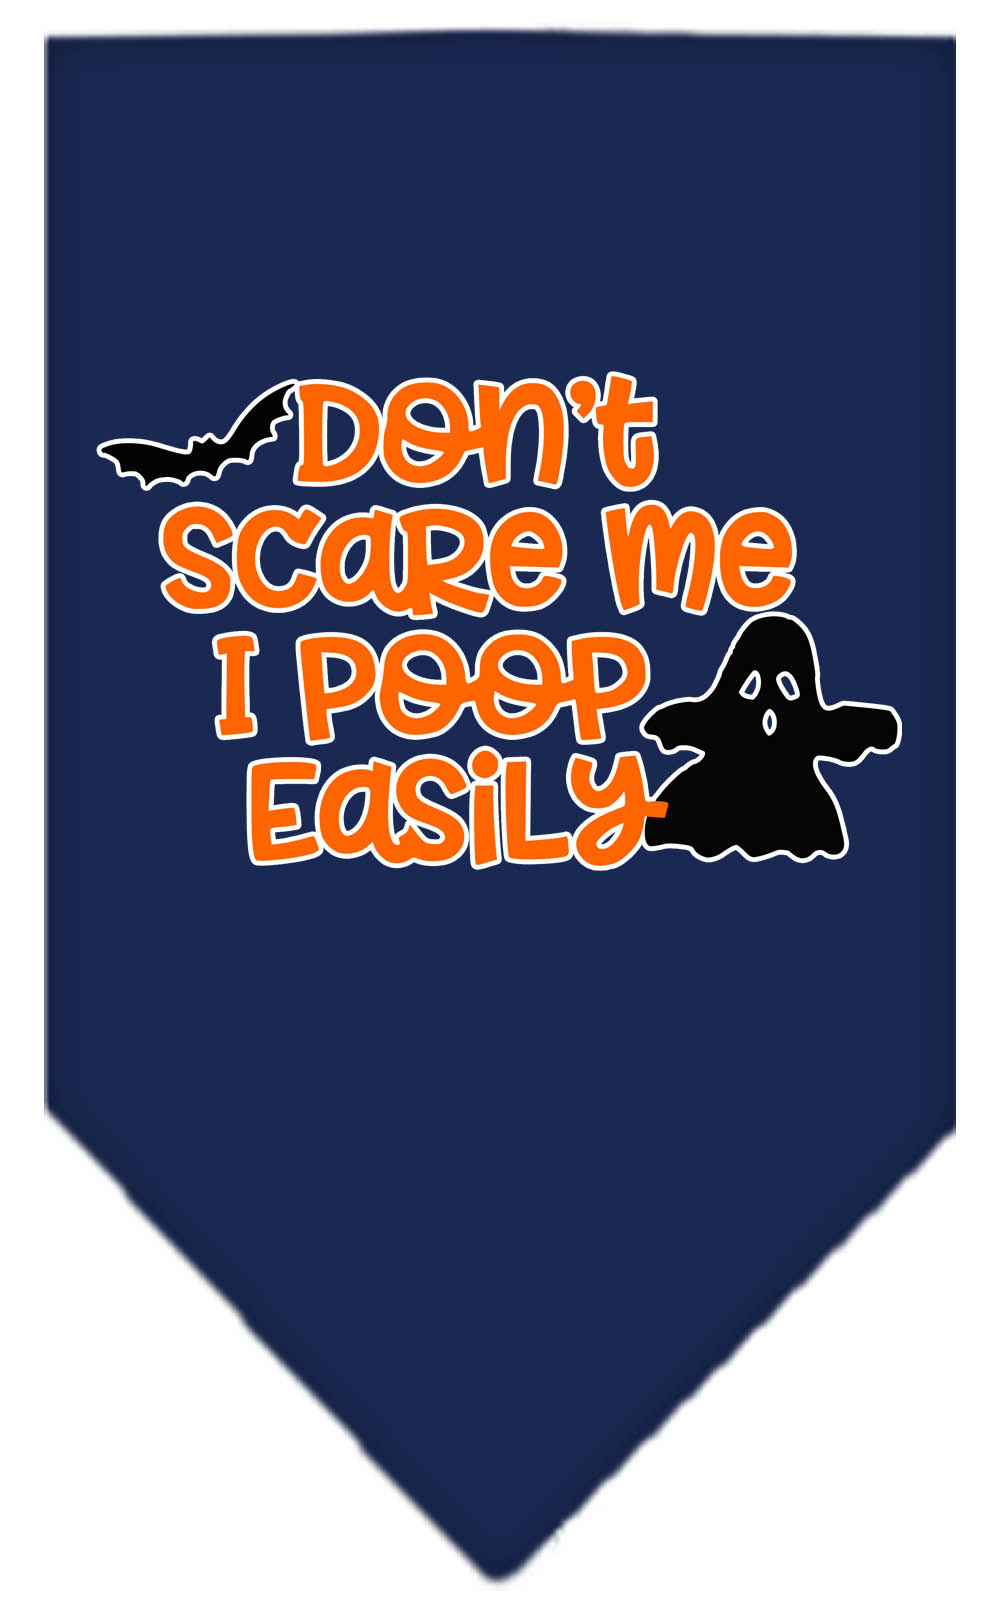 Don't Scare Me, Poops Easily Screen Print Bandana Navy Blue large